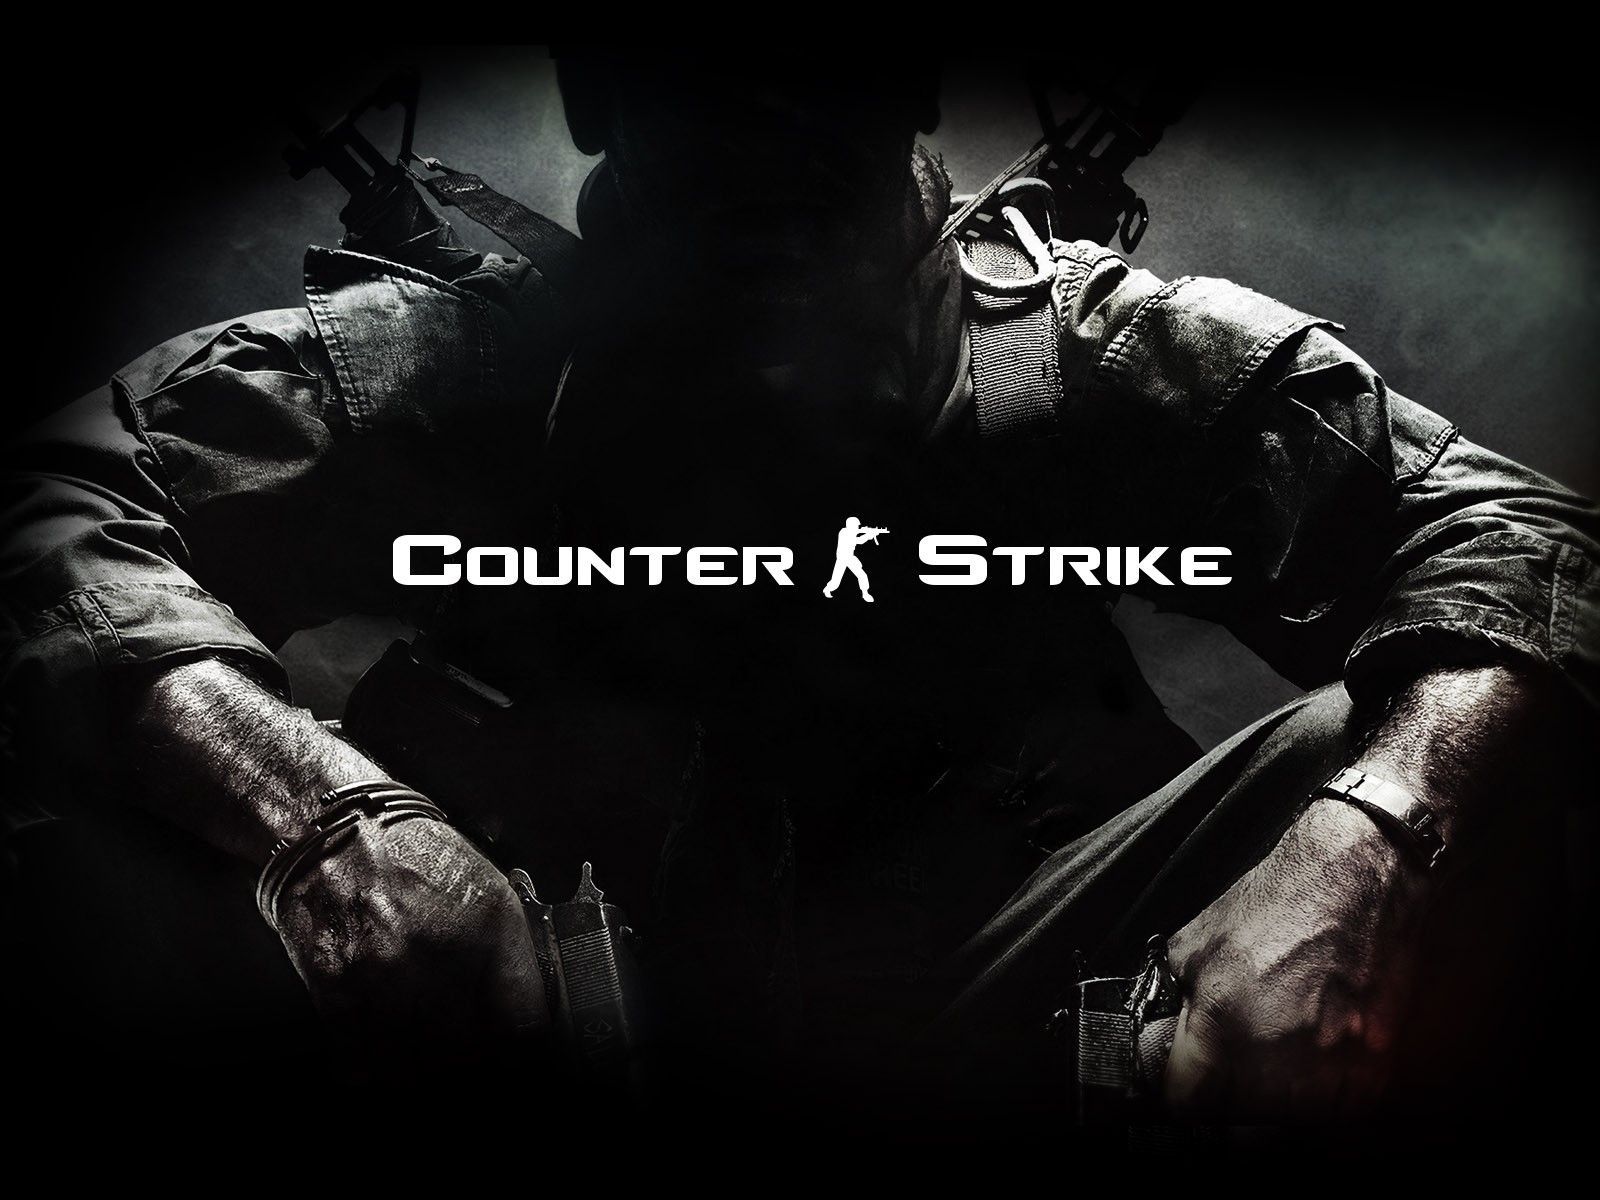 Counter Strike. Today Some Of The Post Popular Games Are First Person Shooters (or FPS) My Personal Favorite At The Moment Is Counter. Counter, Strike, Half Life